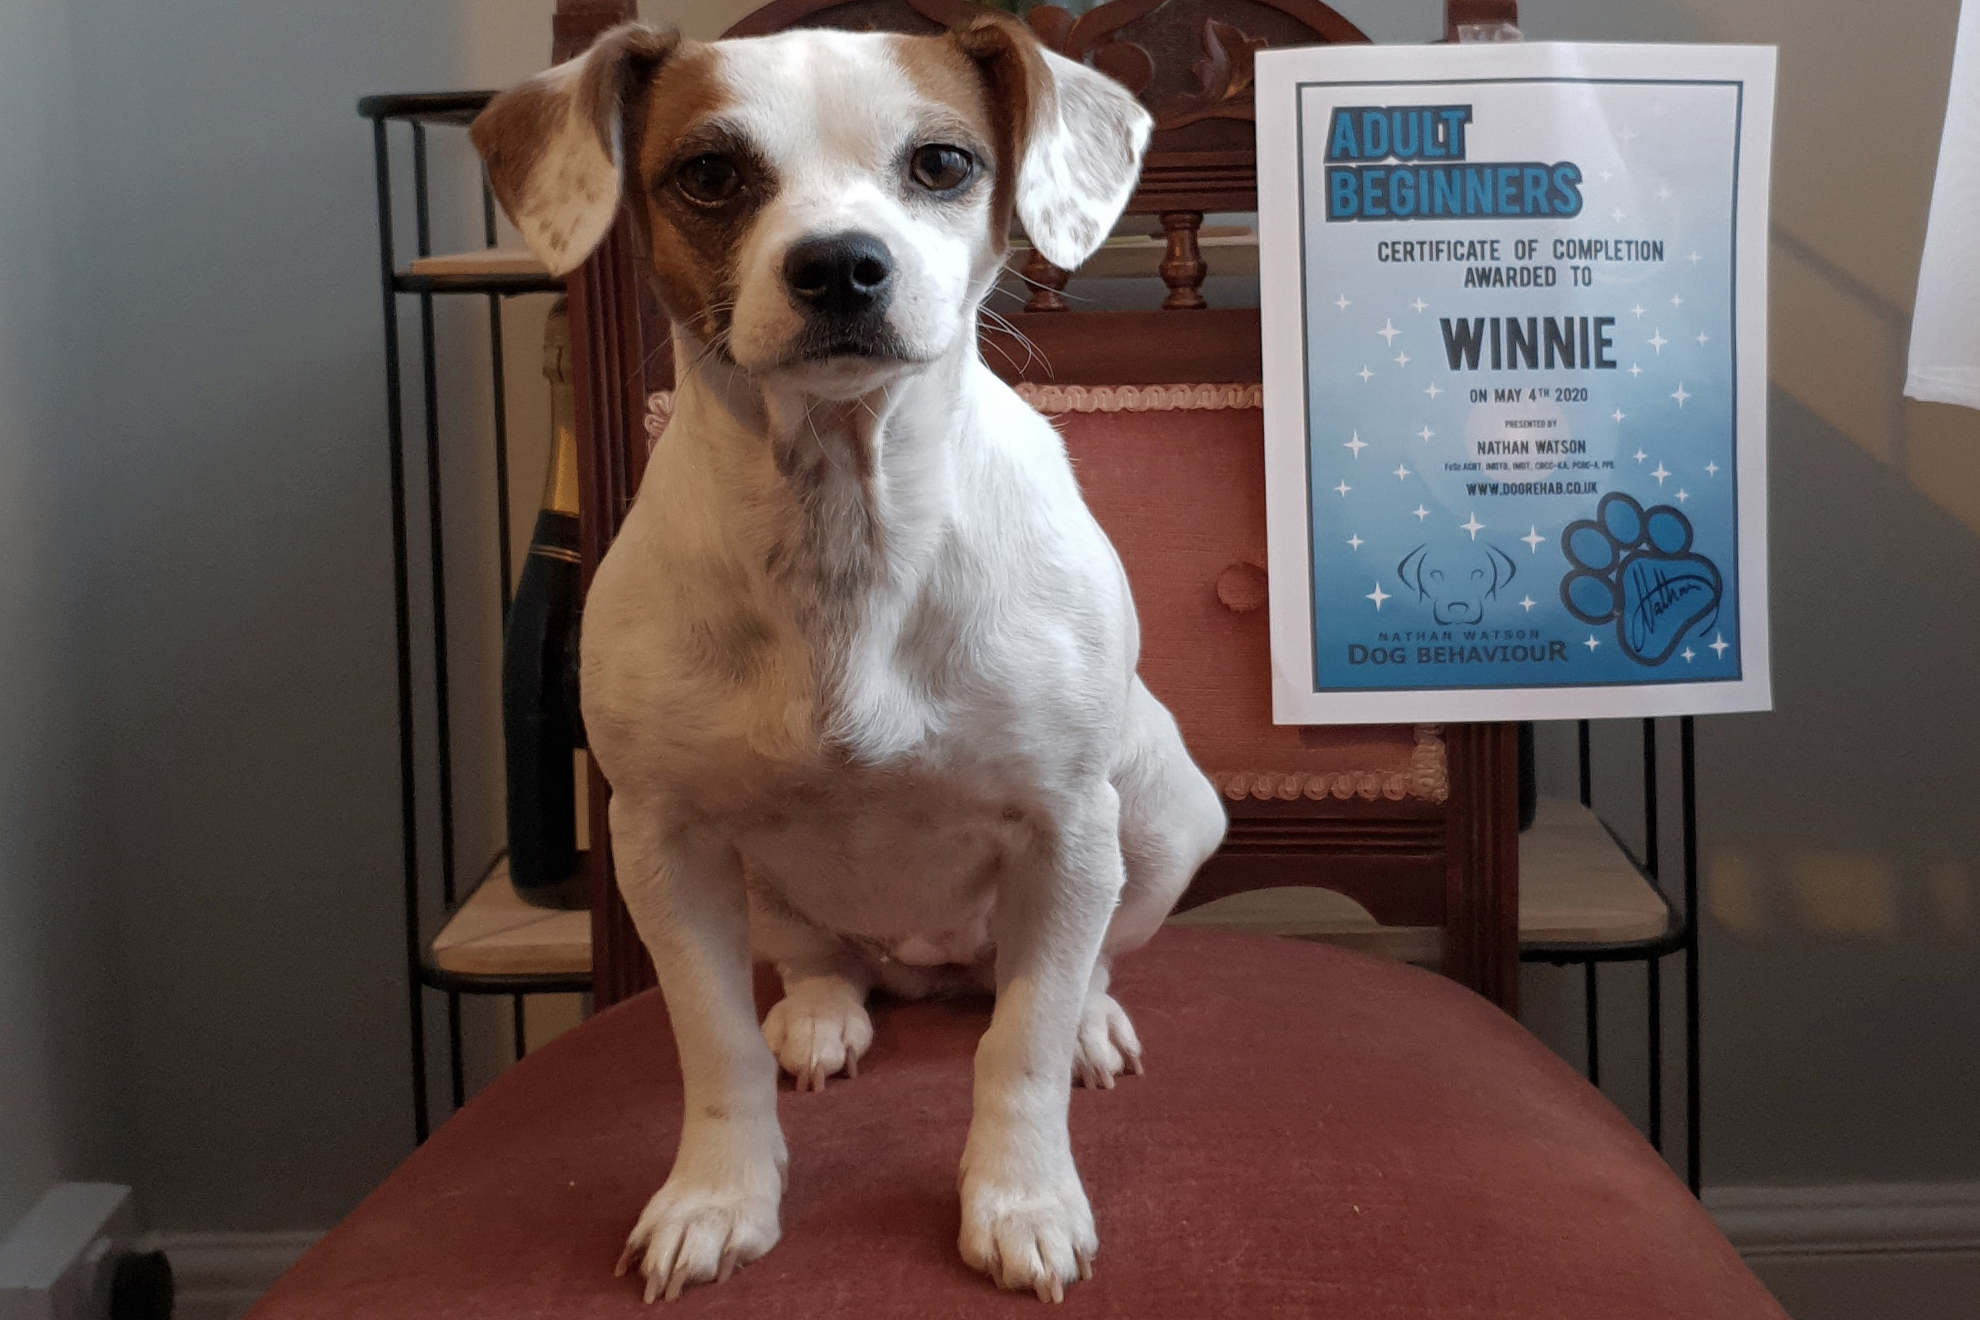 Jack Russell with dog training class certificate